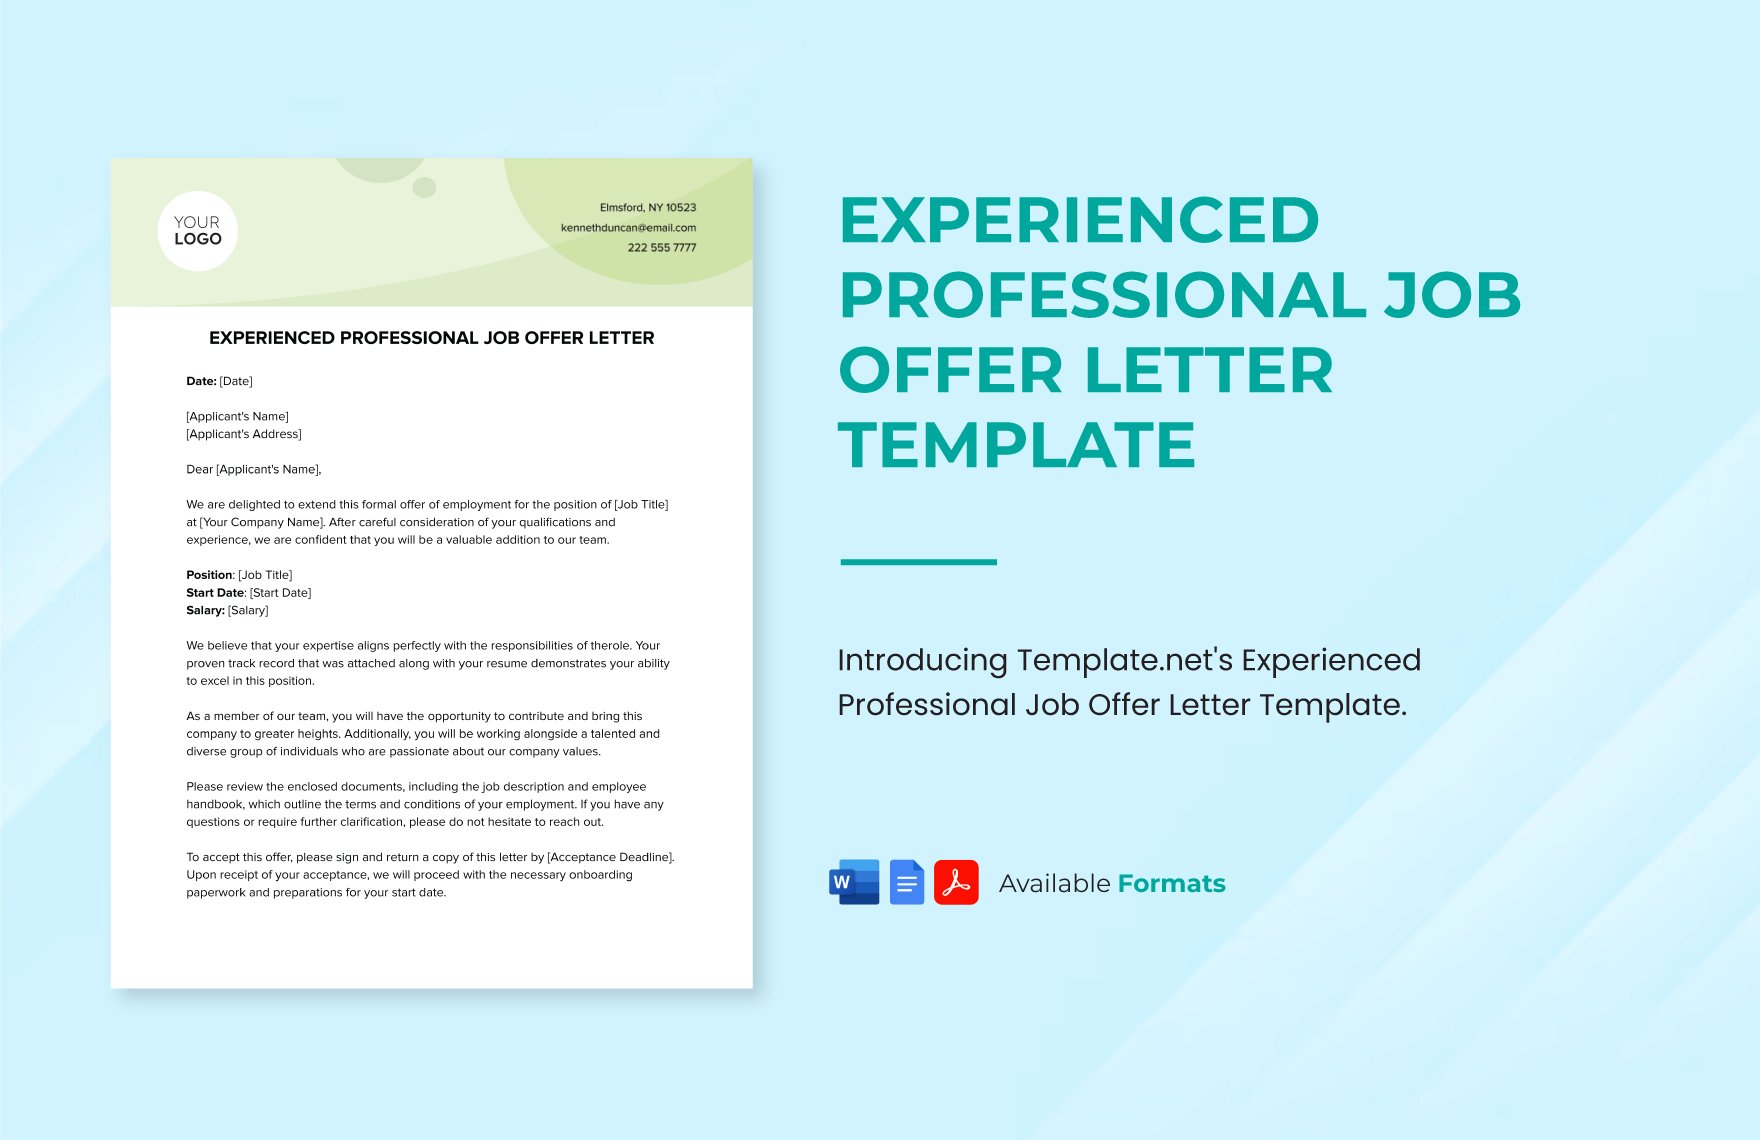 Experienced Professional Job Offer Letter Template in Word, Google Docs, PDF